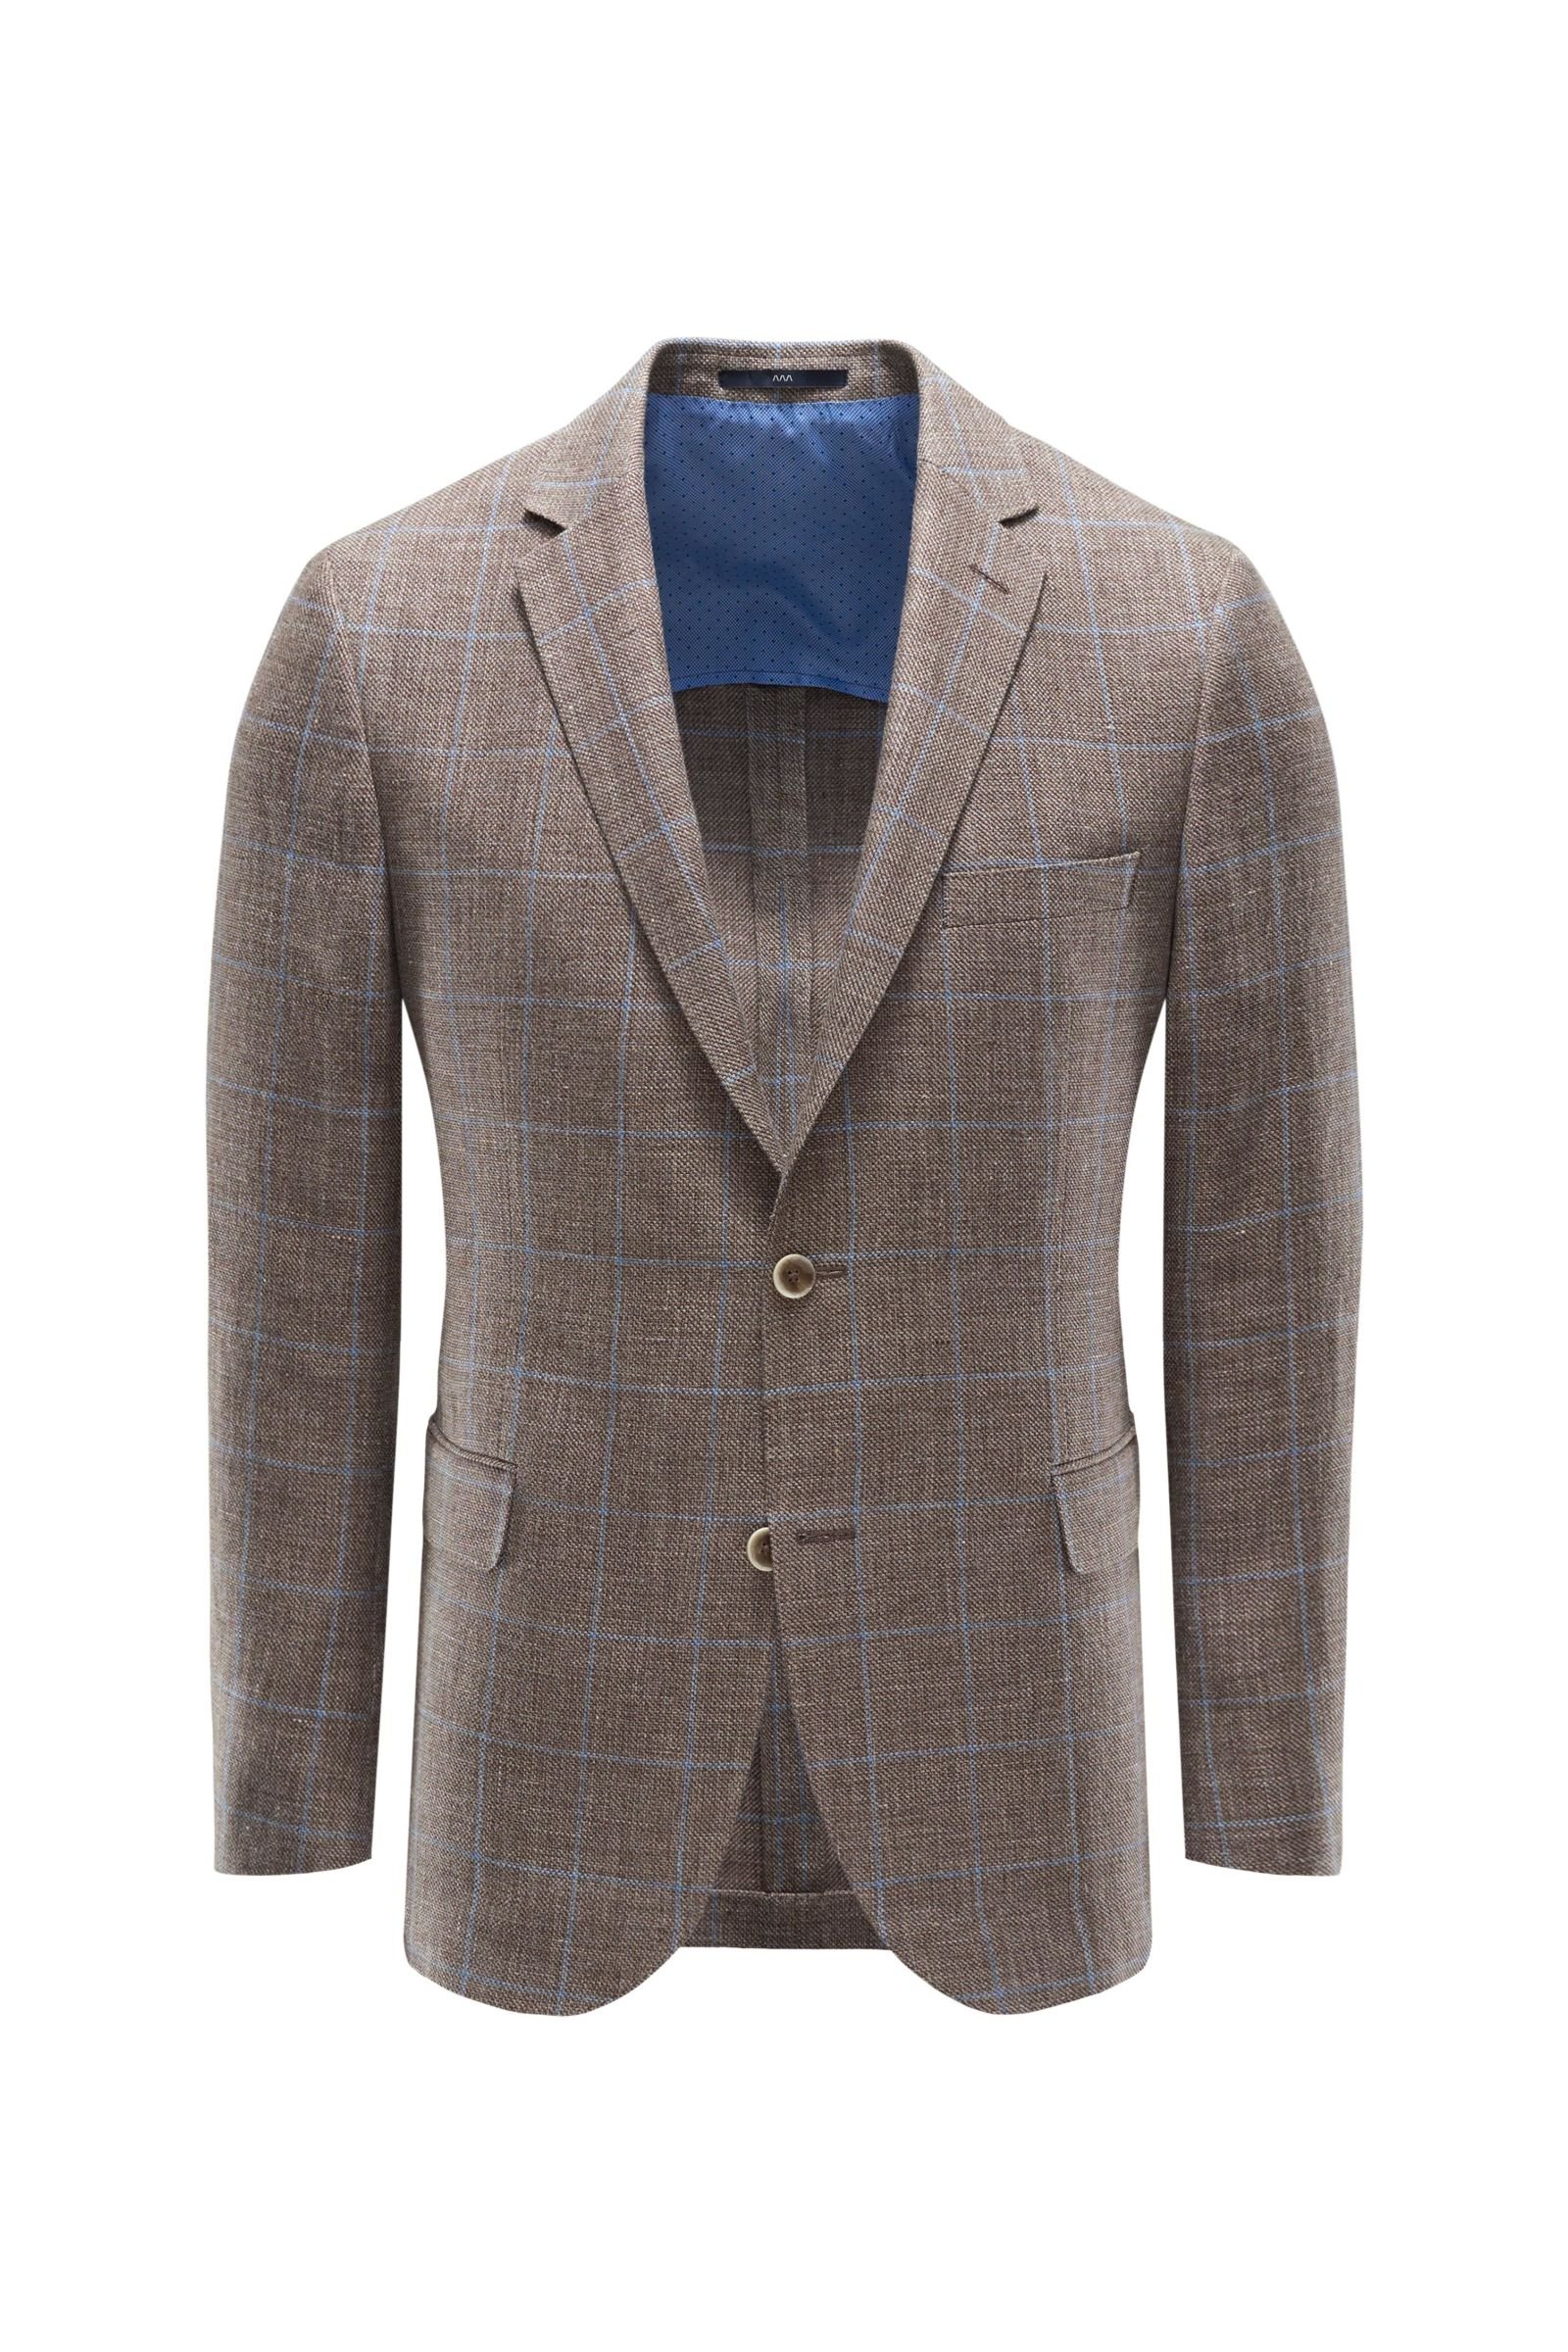 Smart-casual jacket 'Sean' light brown checked